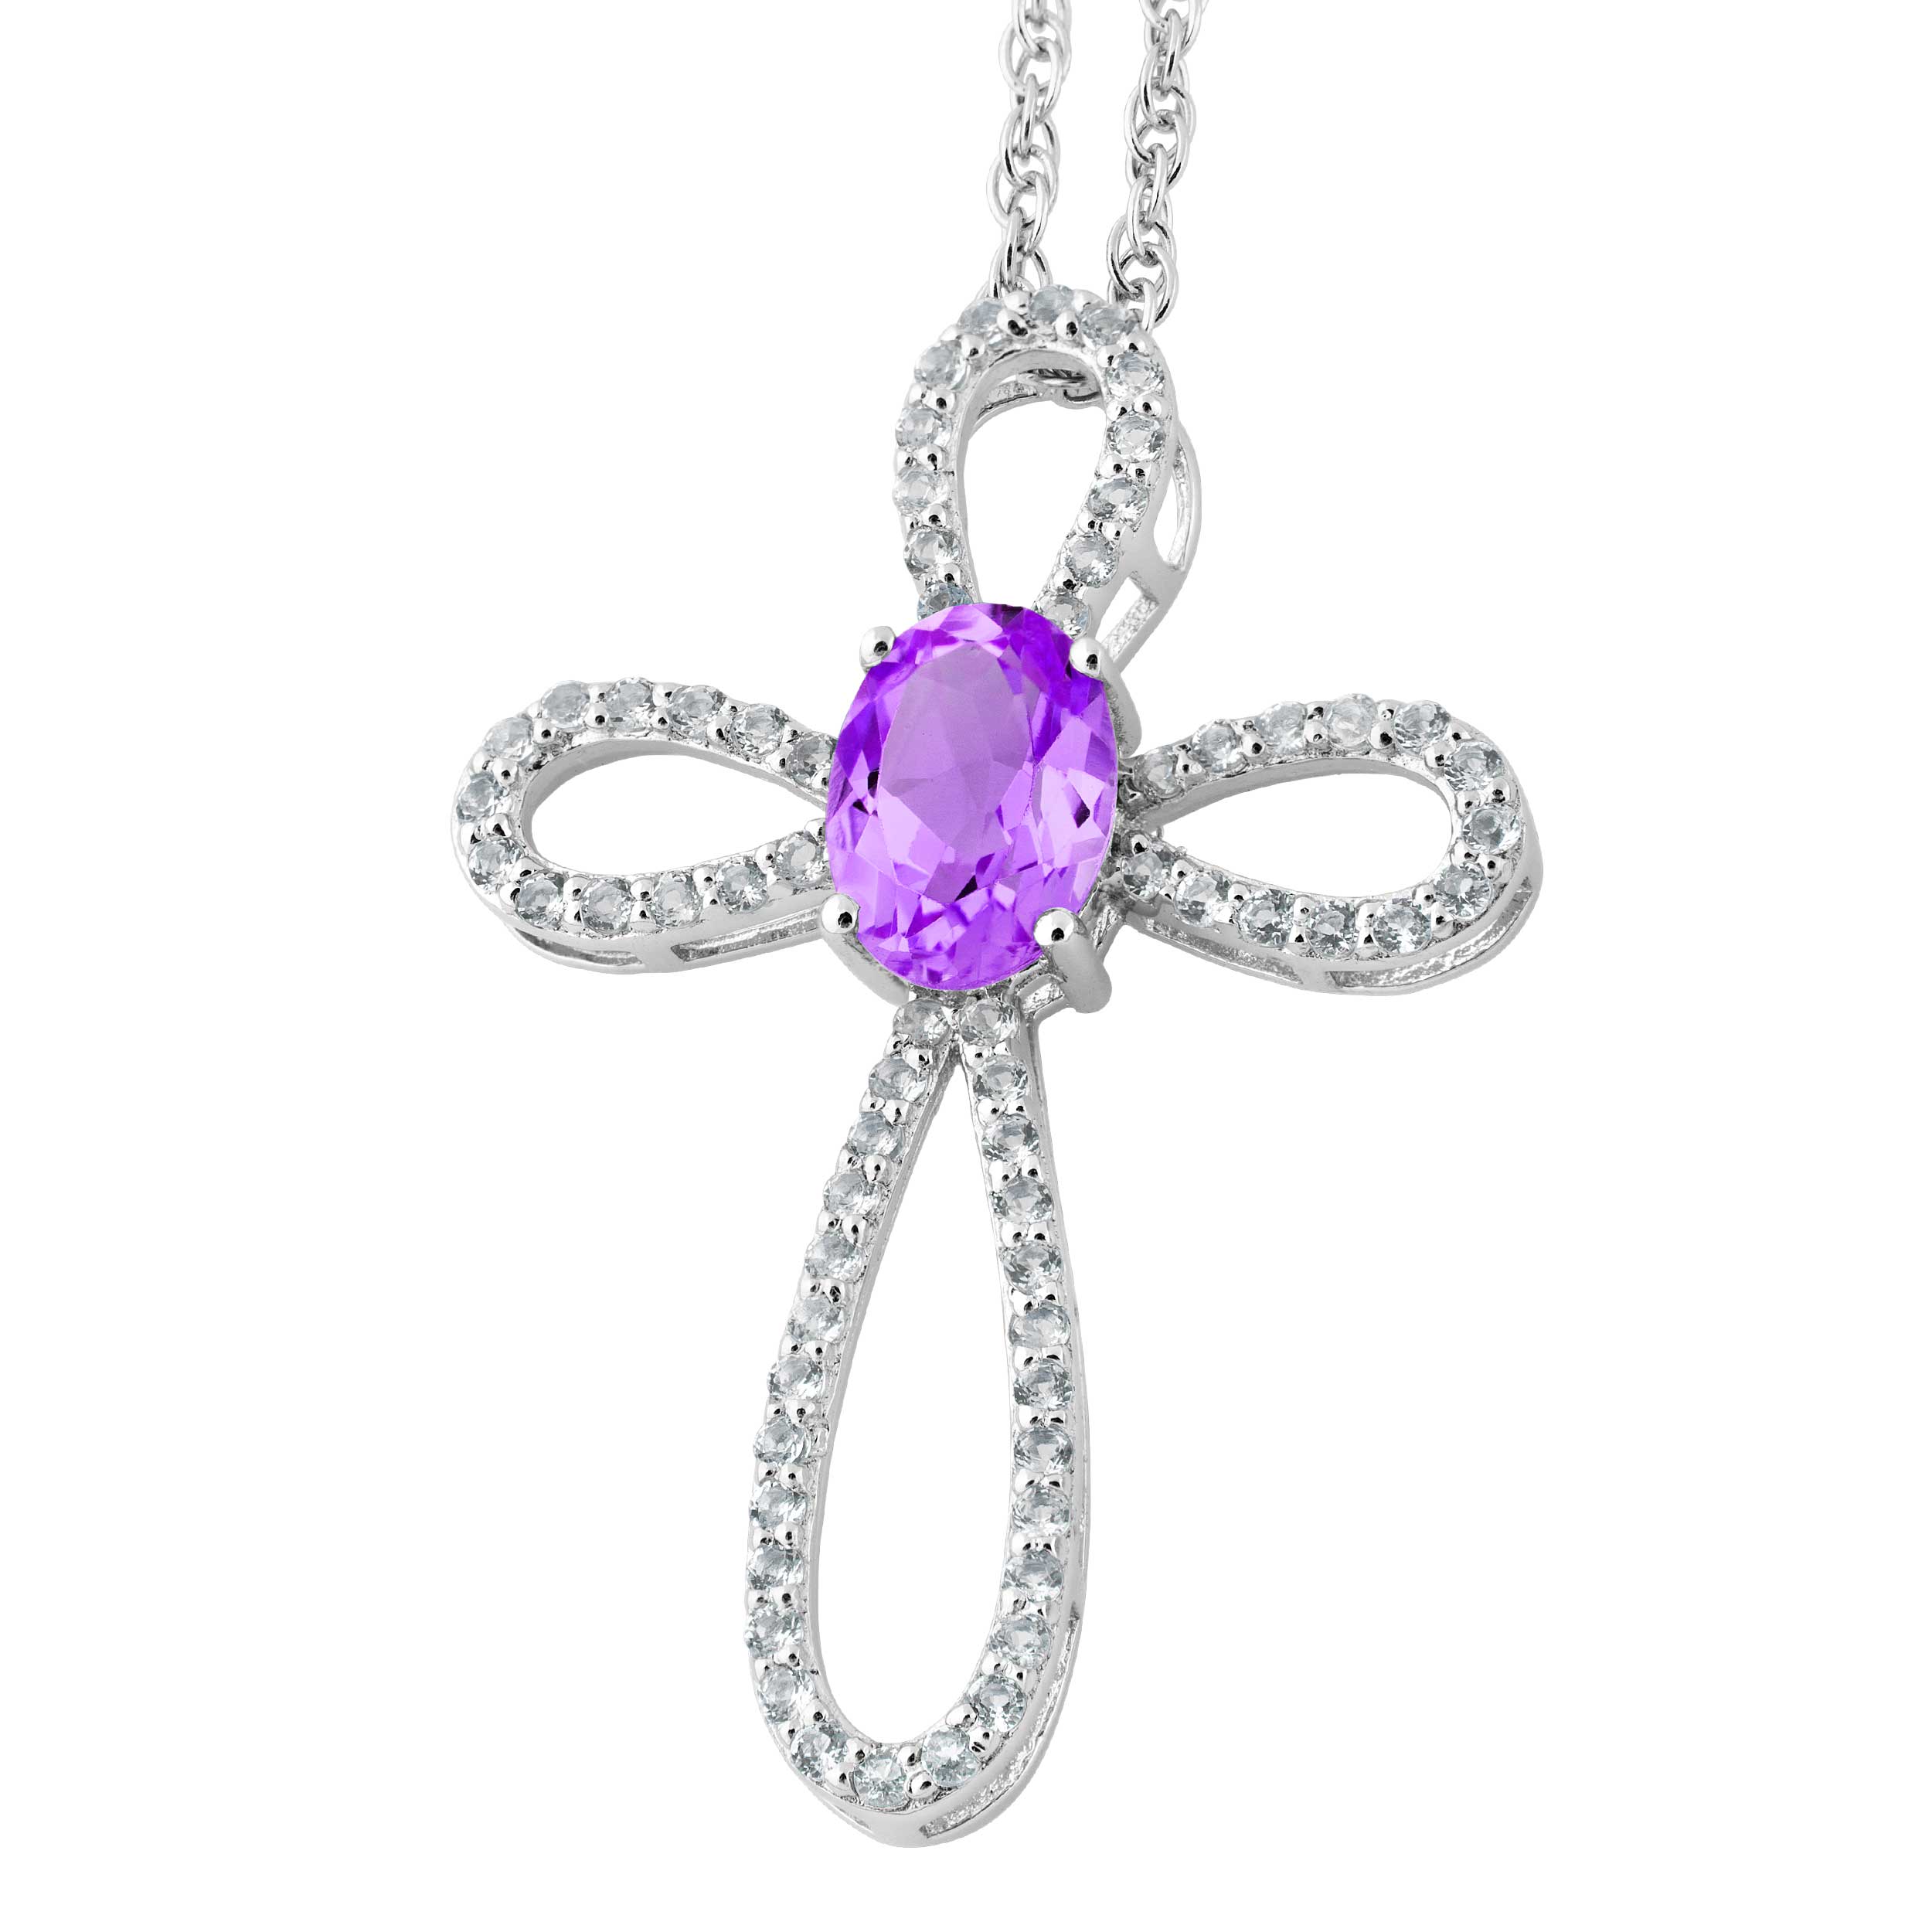 Oval Brazillian Amethyst and White Topaz Cross Pendant Necklace, Rhodium Plated Sterling Silver